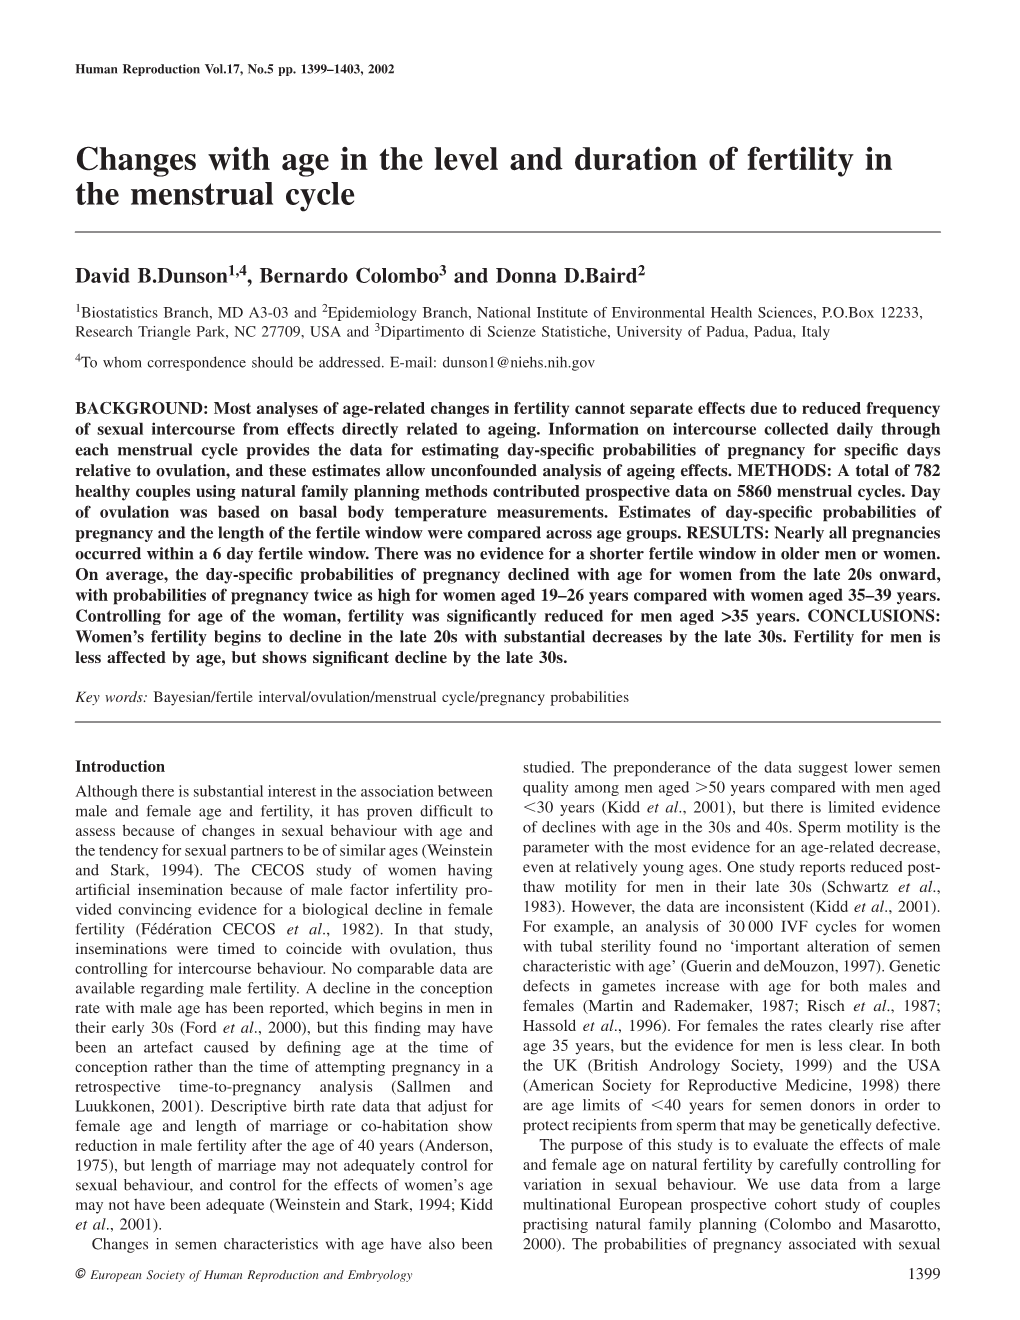 Changes with Age in the Level and Duration of Fertility in the Menstrual Cycle